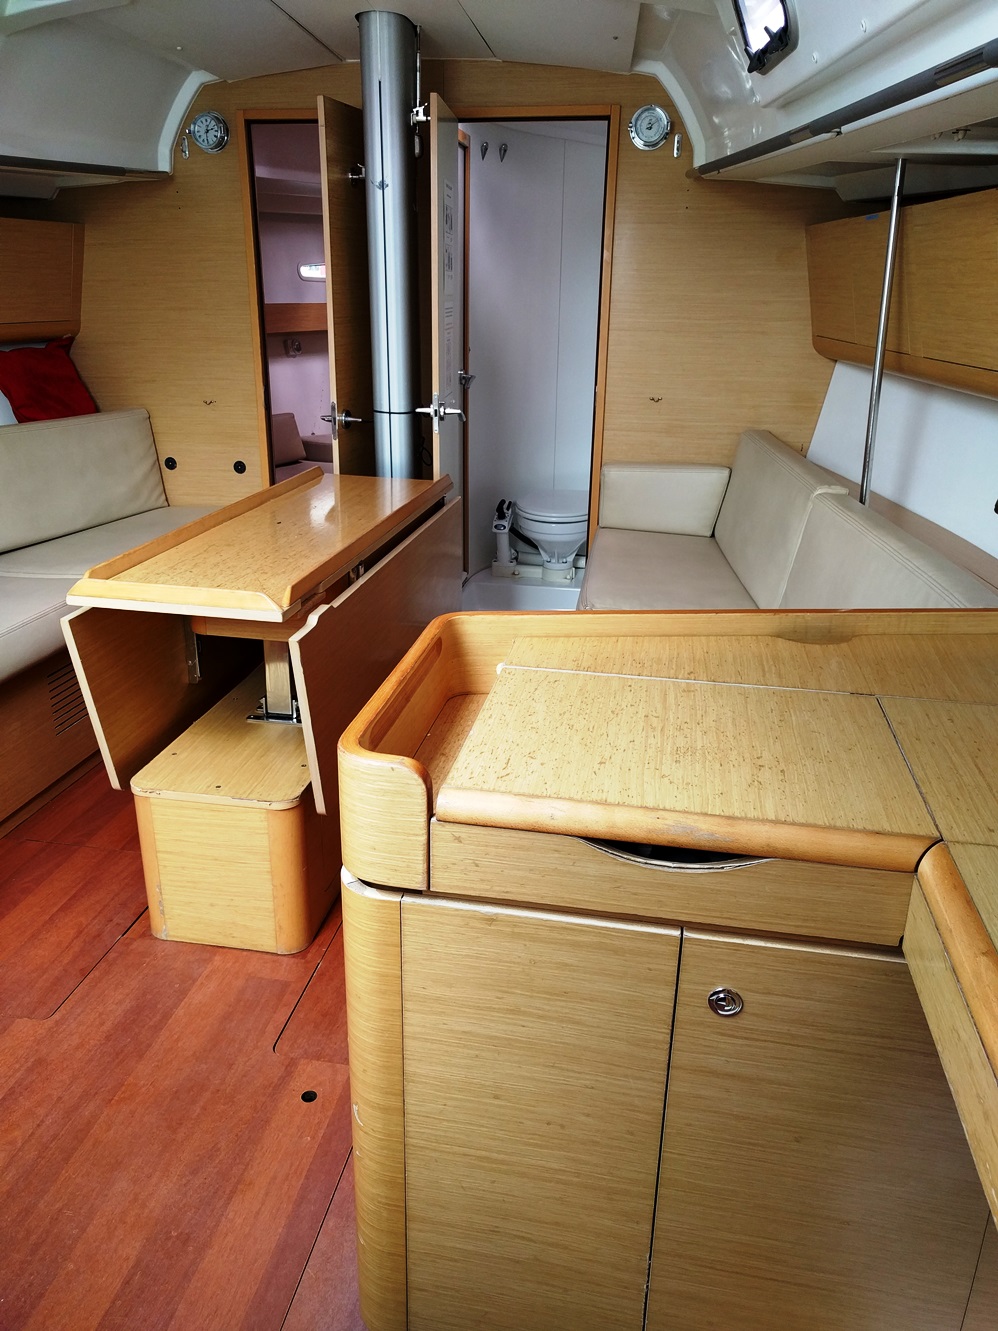 Skippered Beneteau First 40 for up to 17 passengers